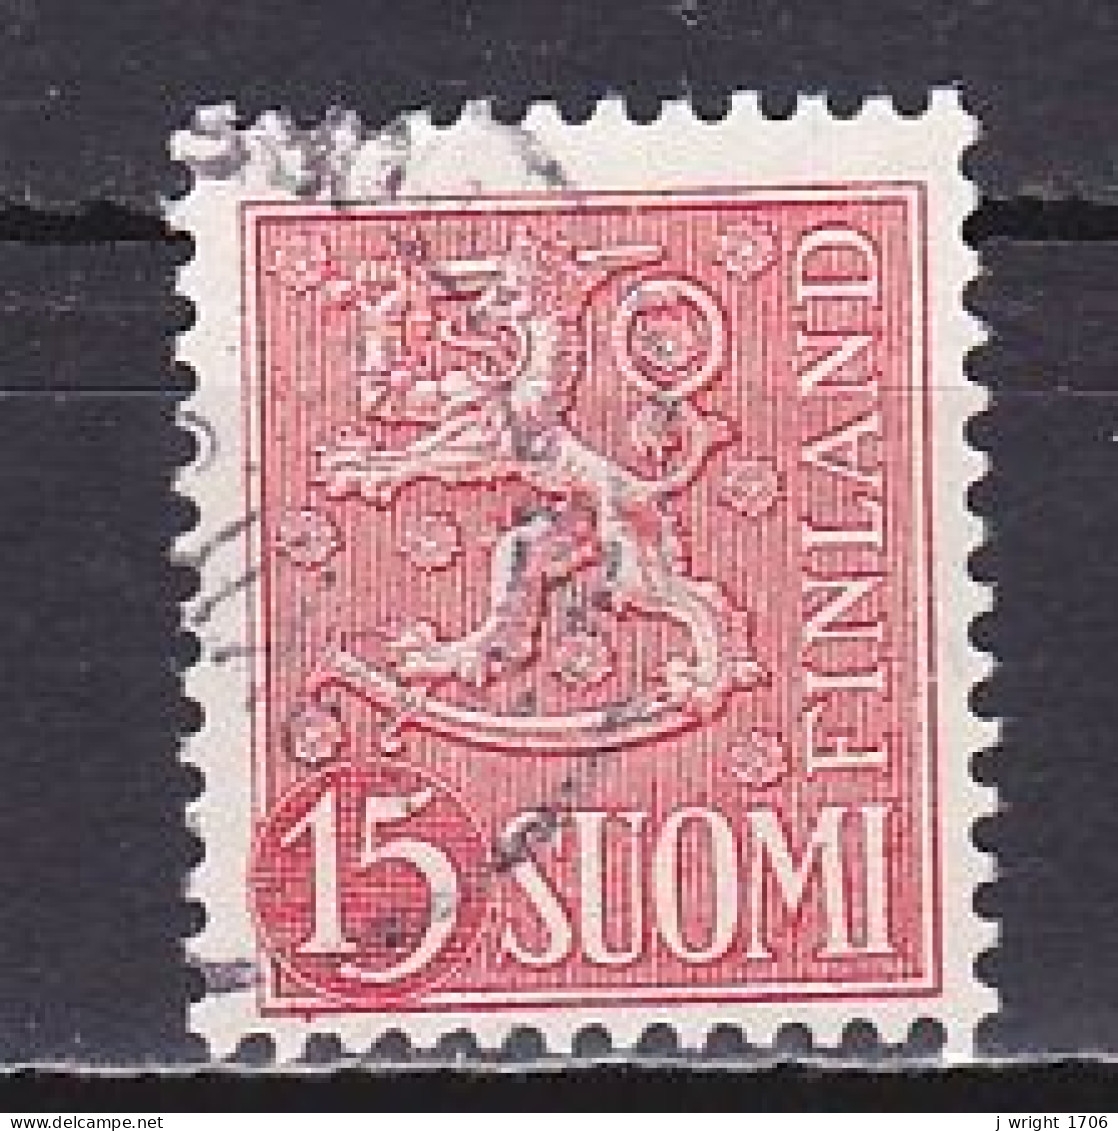 Finland, 1954, Lion, 15mk, USED - Used Stamps